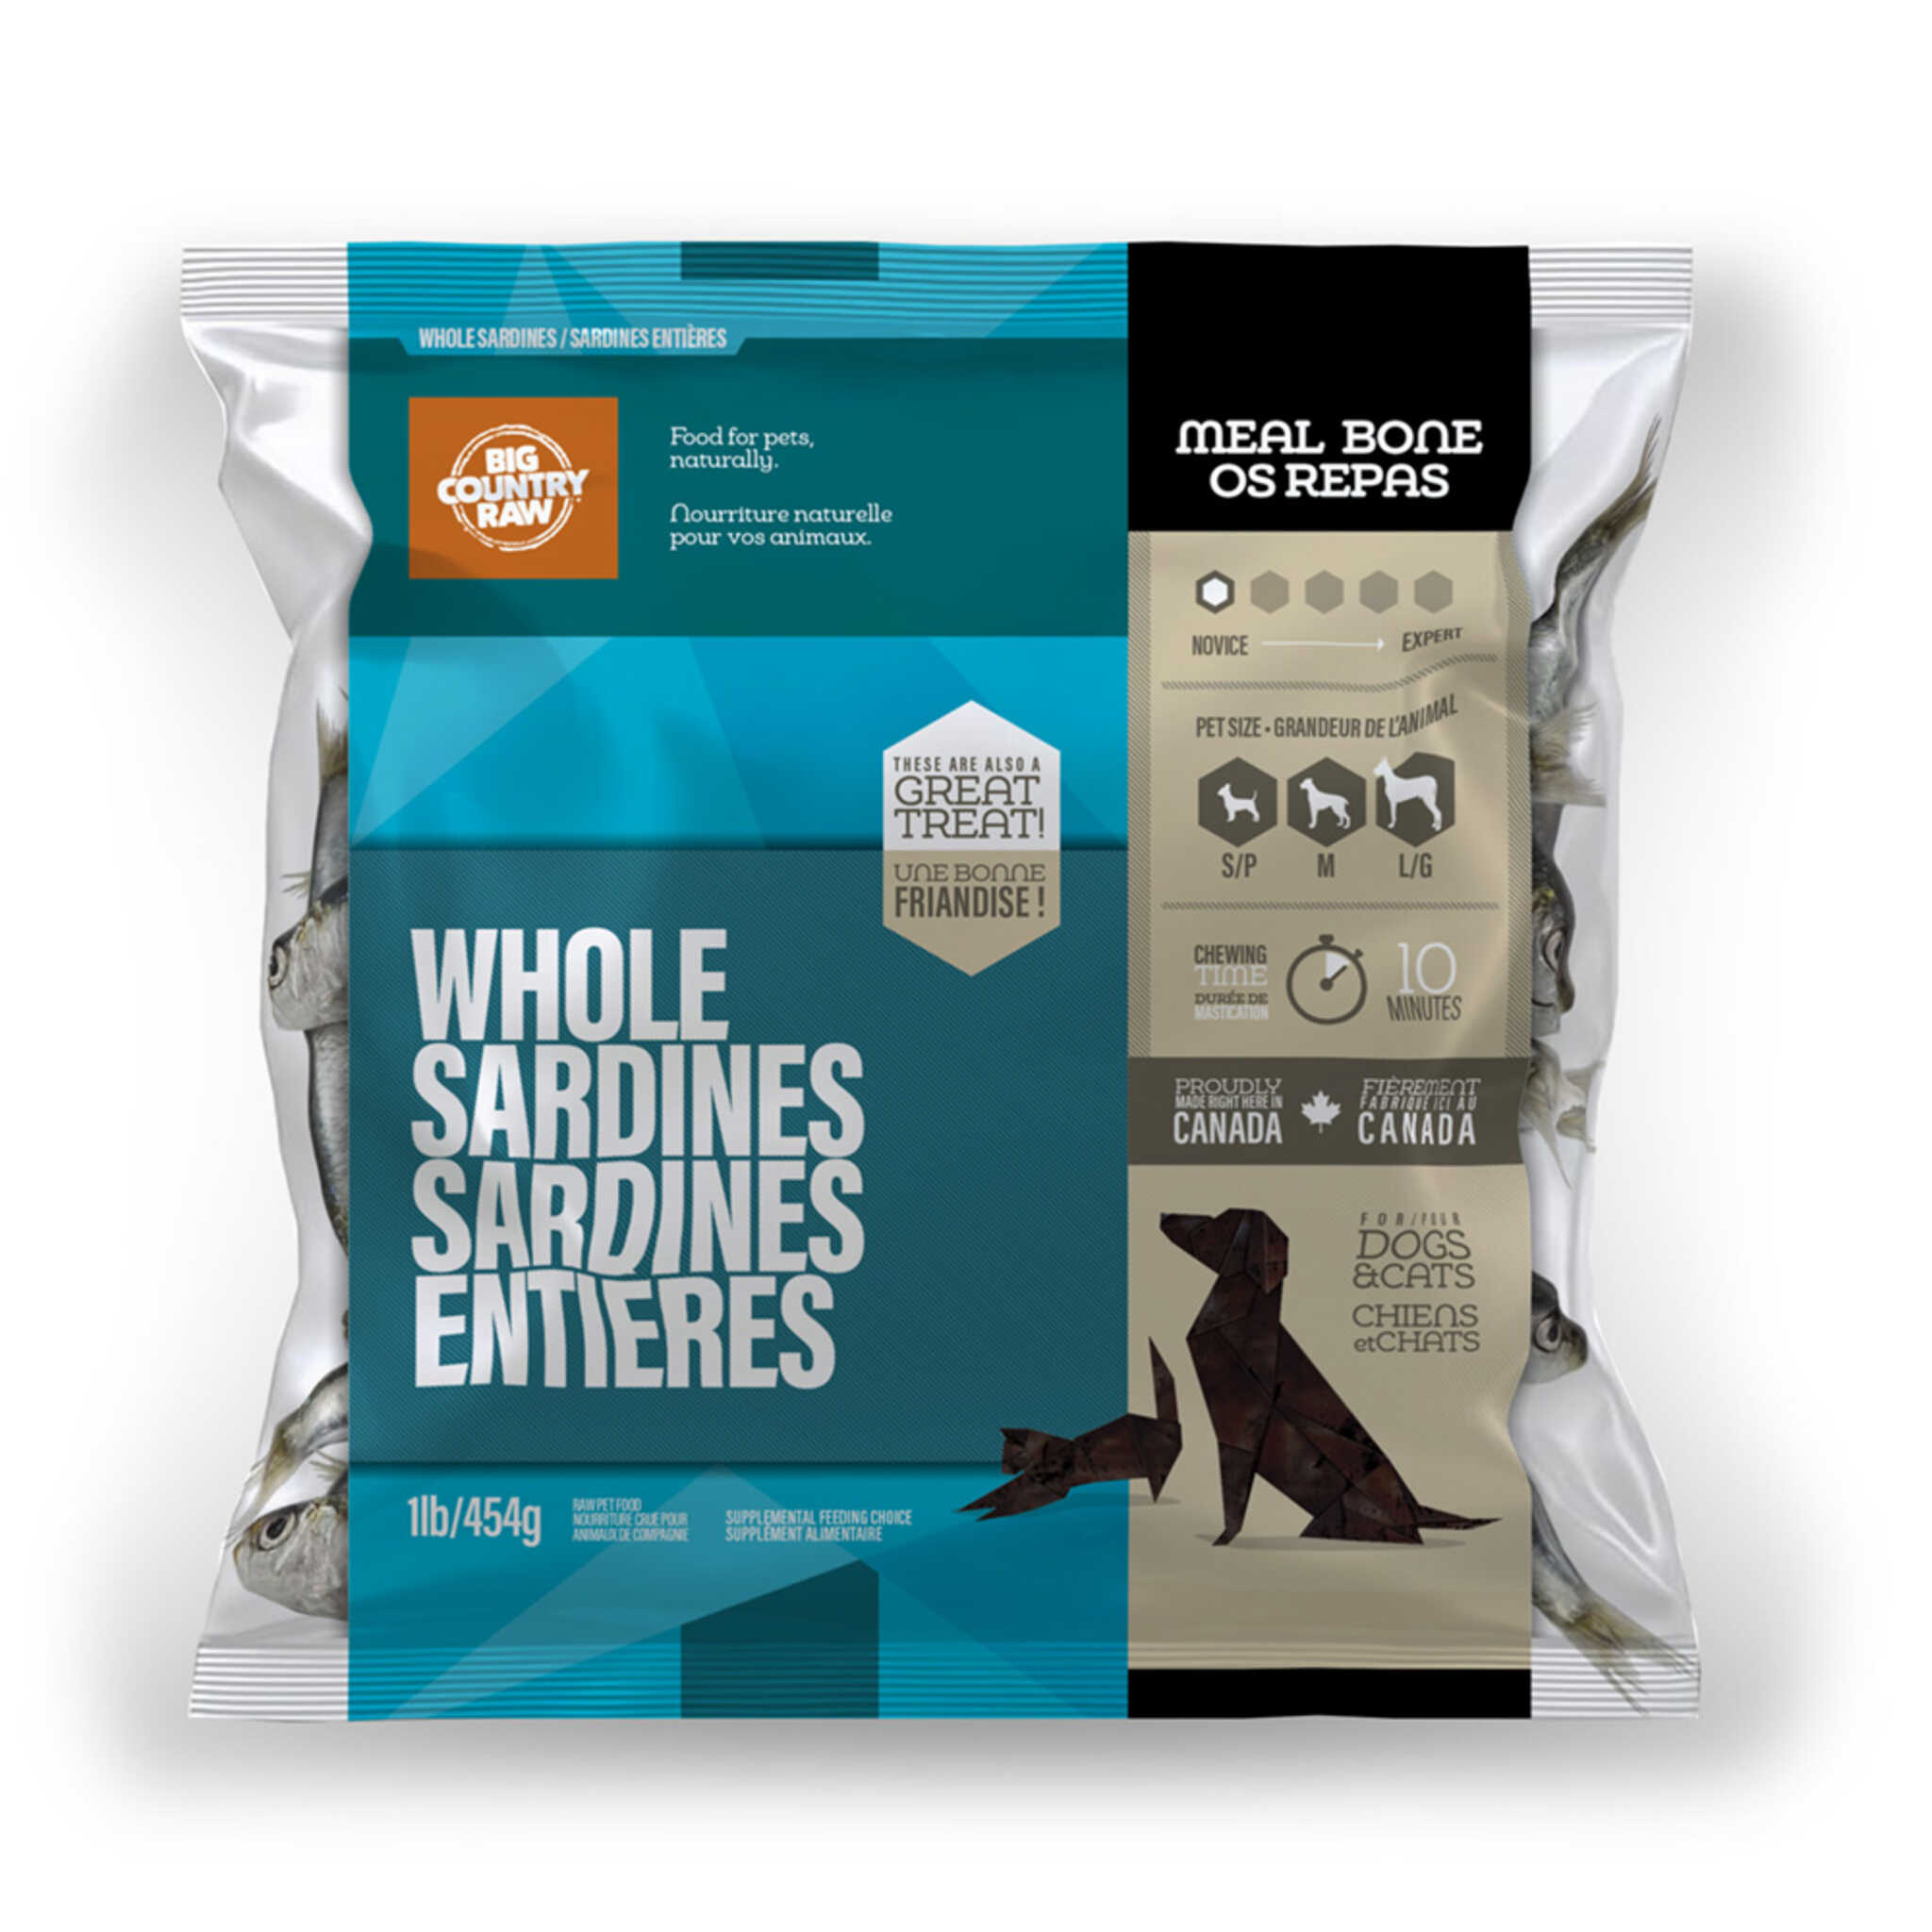 A bag of Big Country Raw Whole Sardines, Cat or Dog treat, 1 lb, roughly 10 minutes chewing time per serving size, requires freezing.